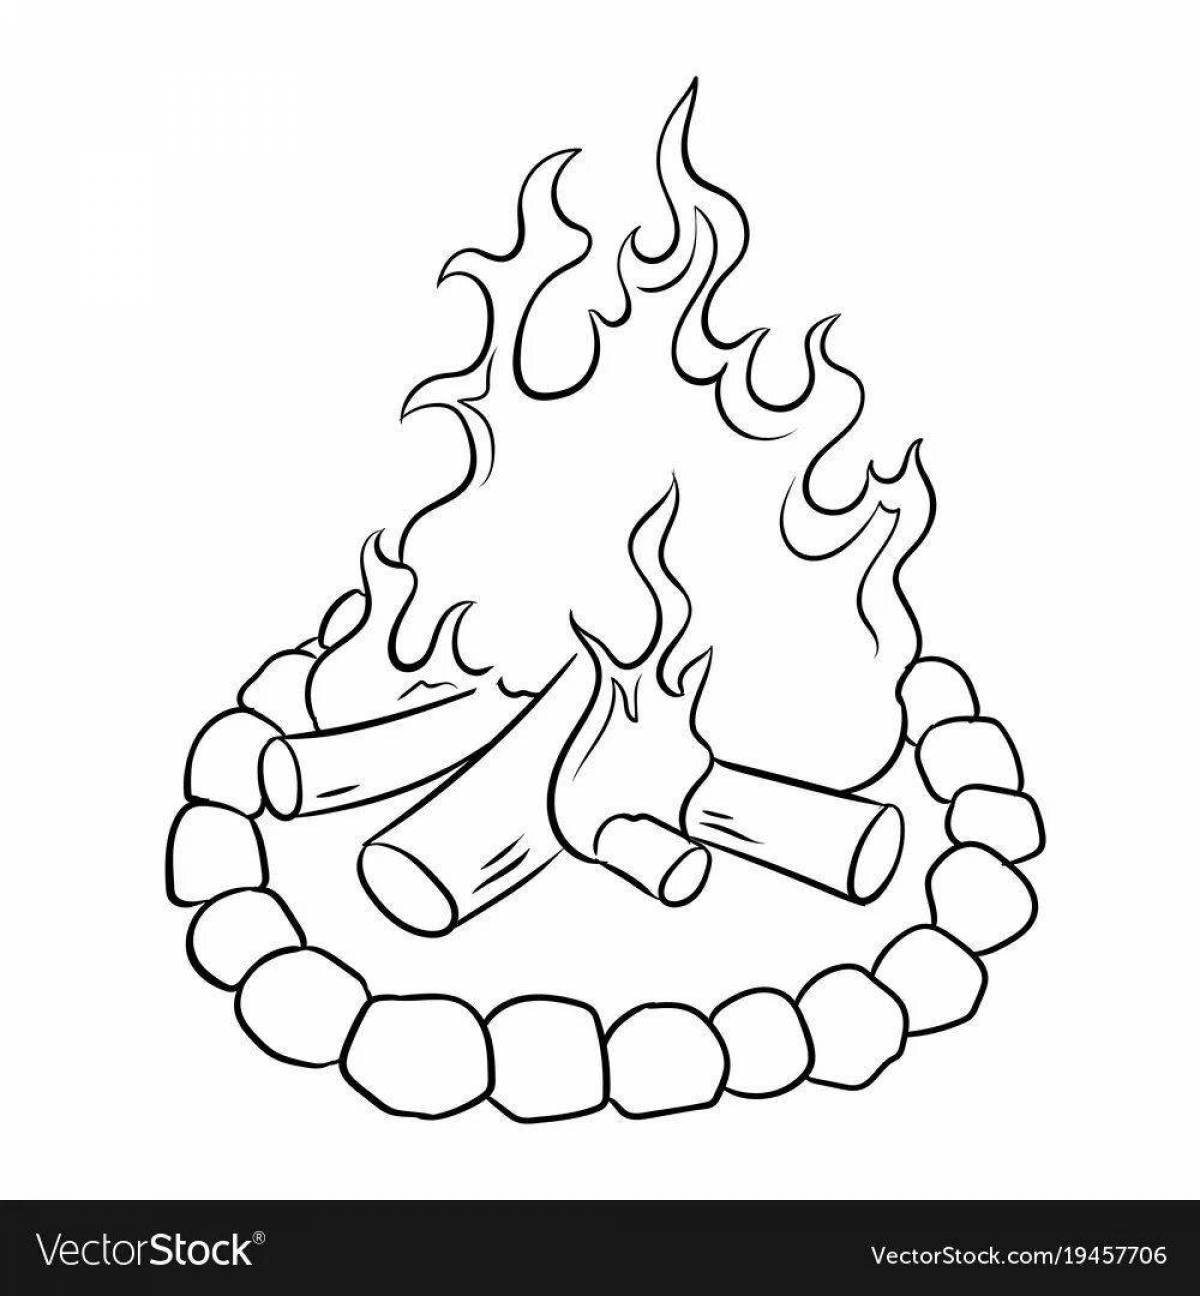 Colorful bonfire coloring book for kids